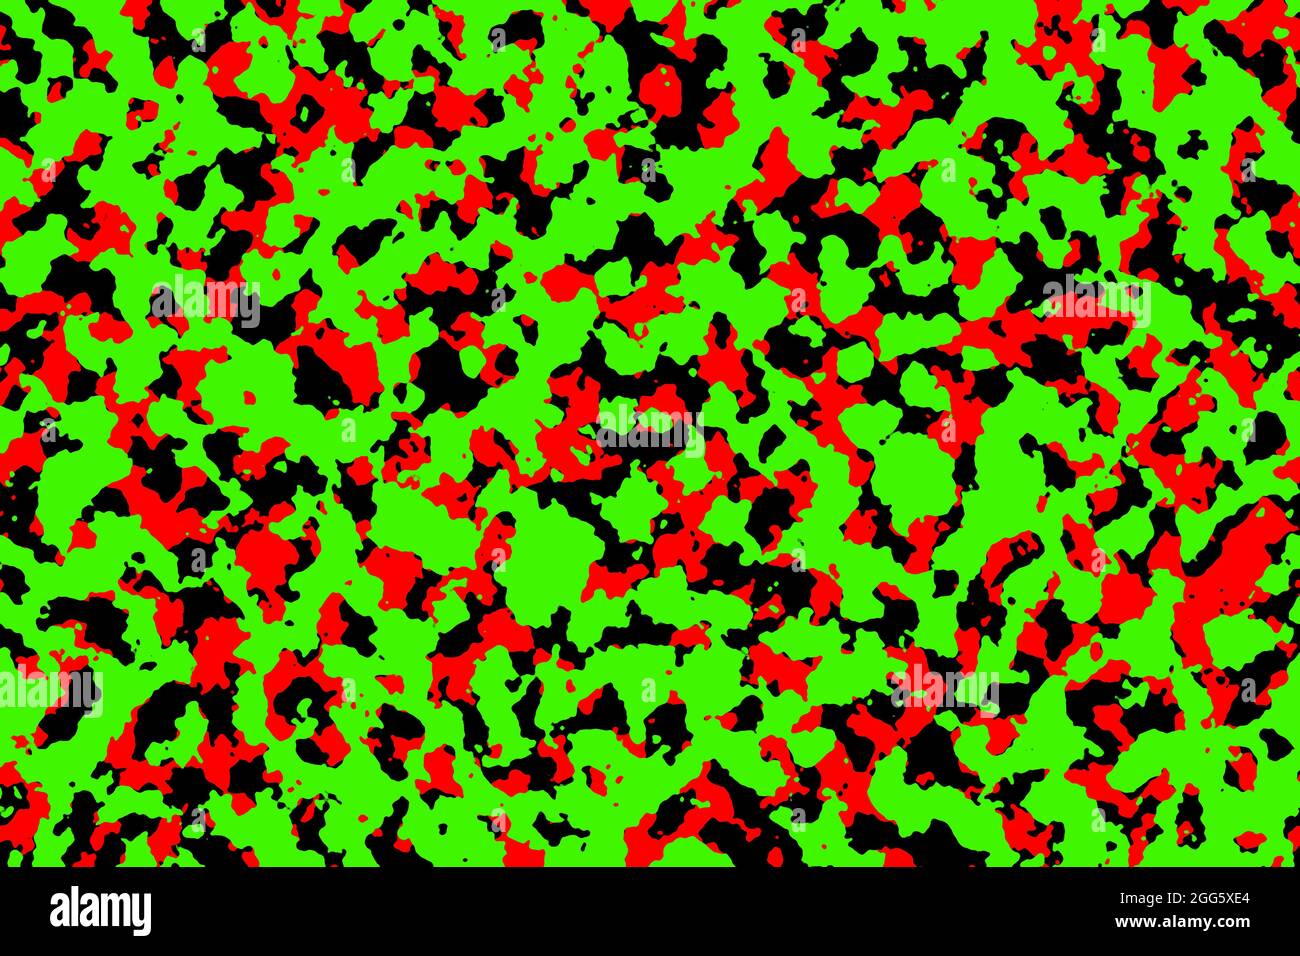 Modern military camouflage red, black and bright green pattern Stock Photo